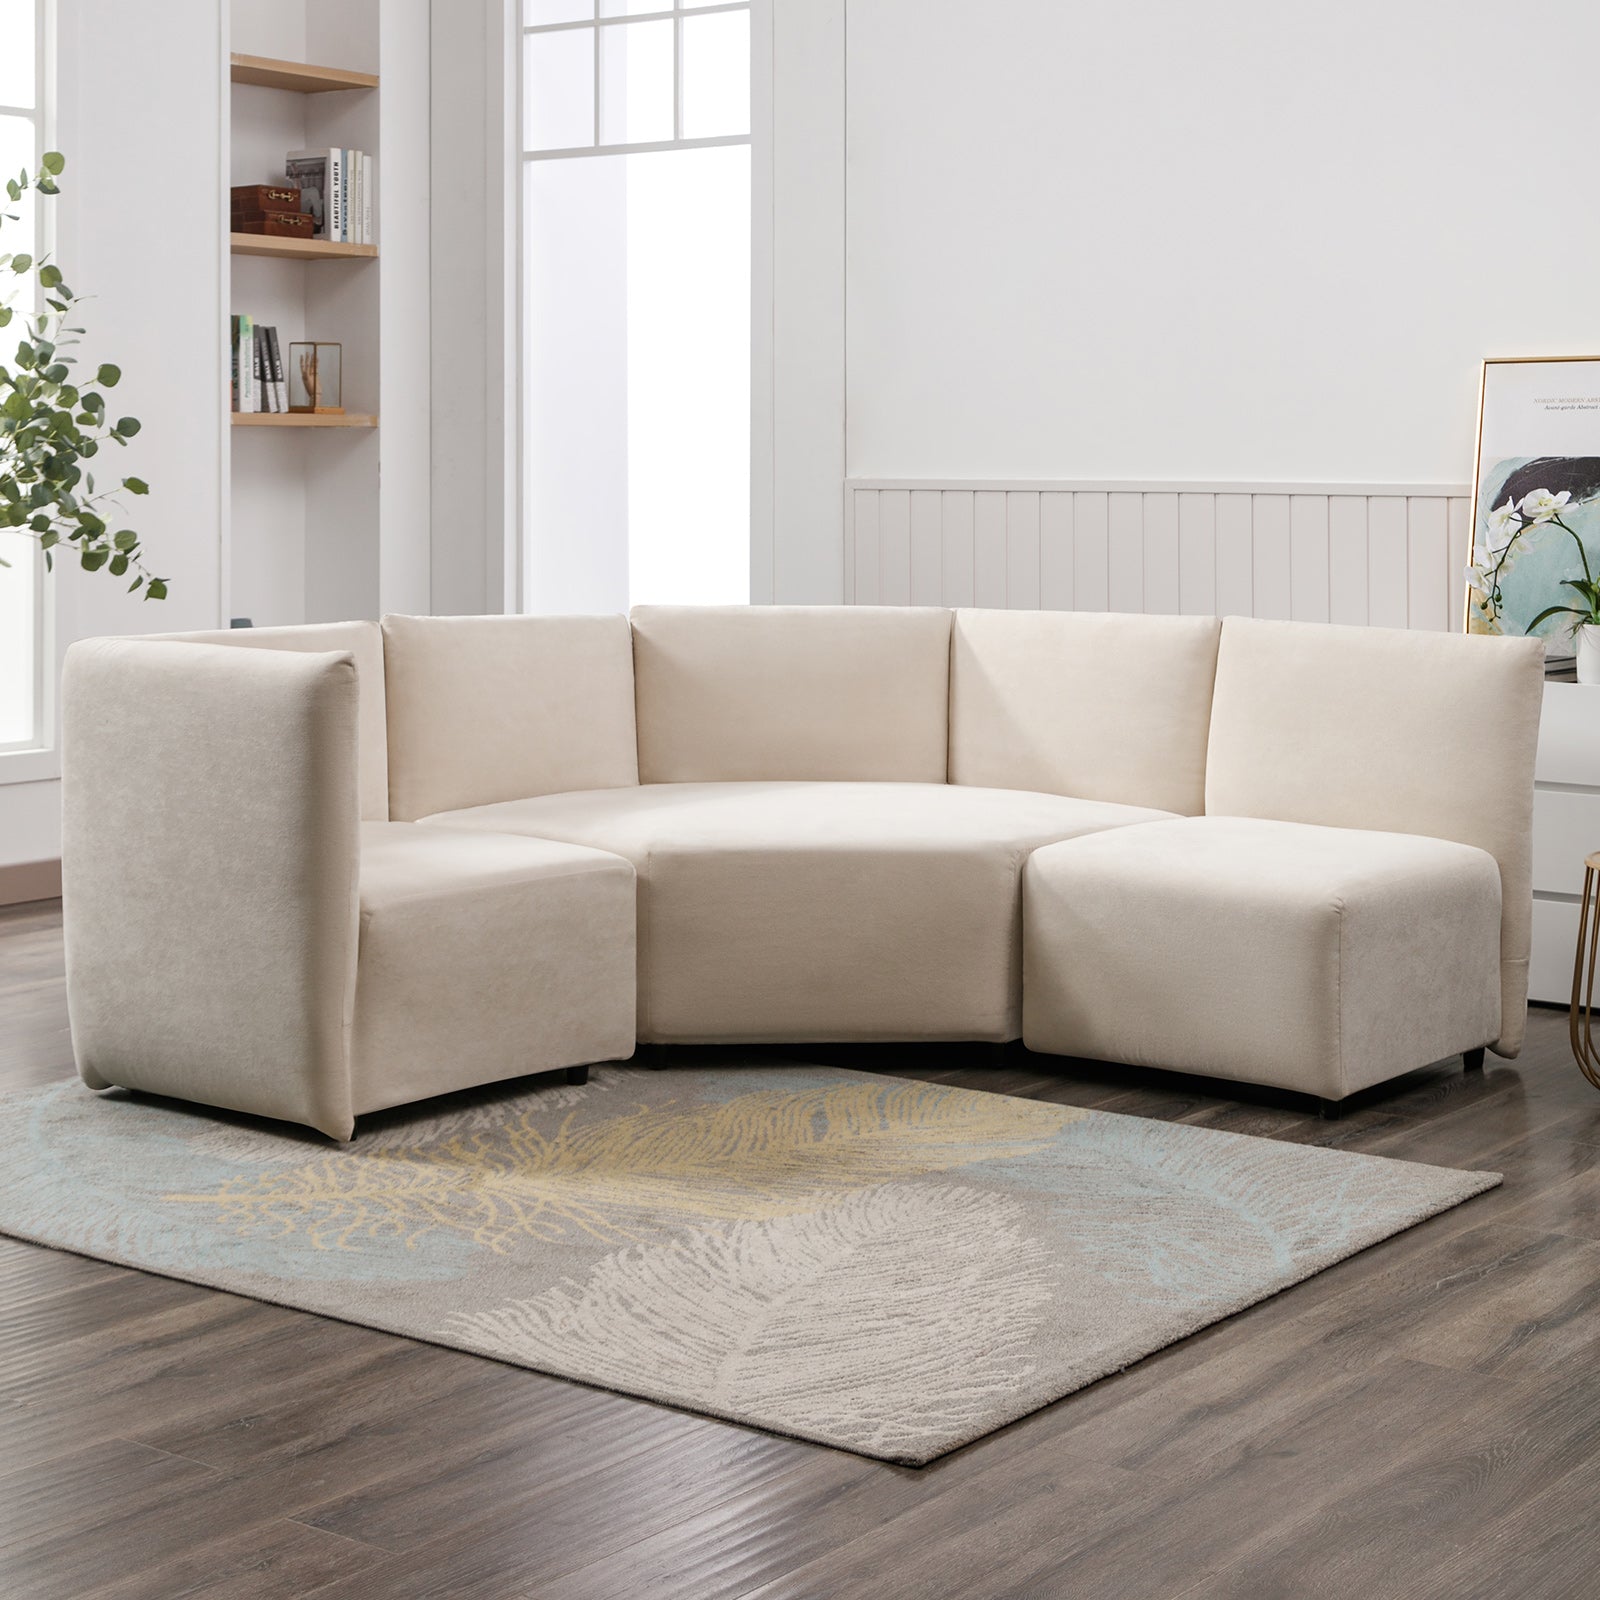 Cecer 3-Piece Free Combination Curved Modular Sectional Sofa